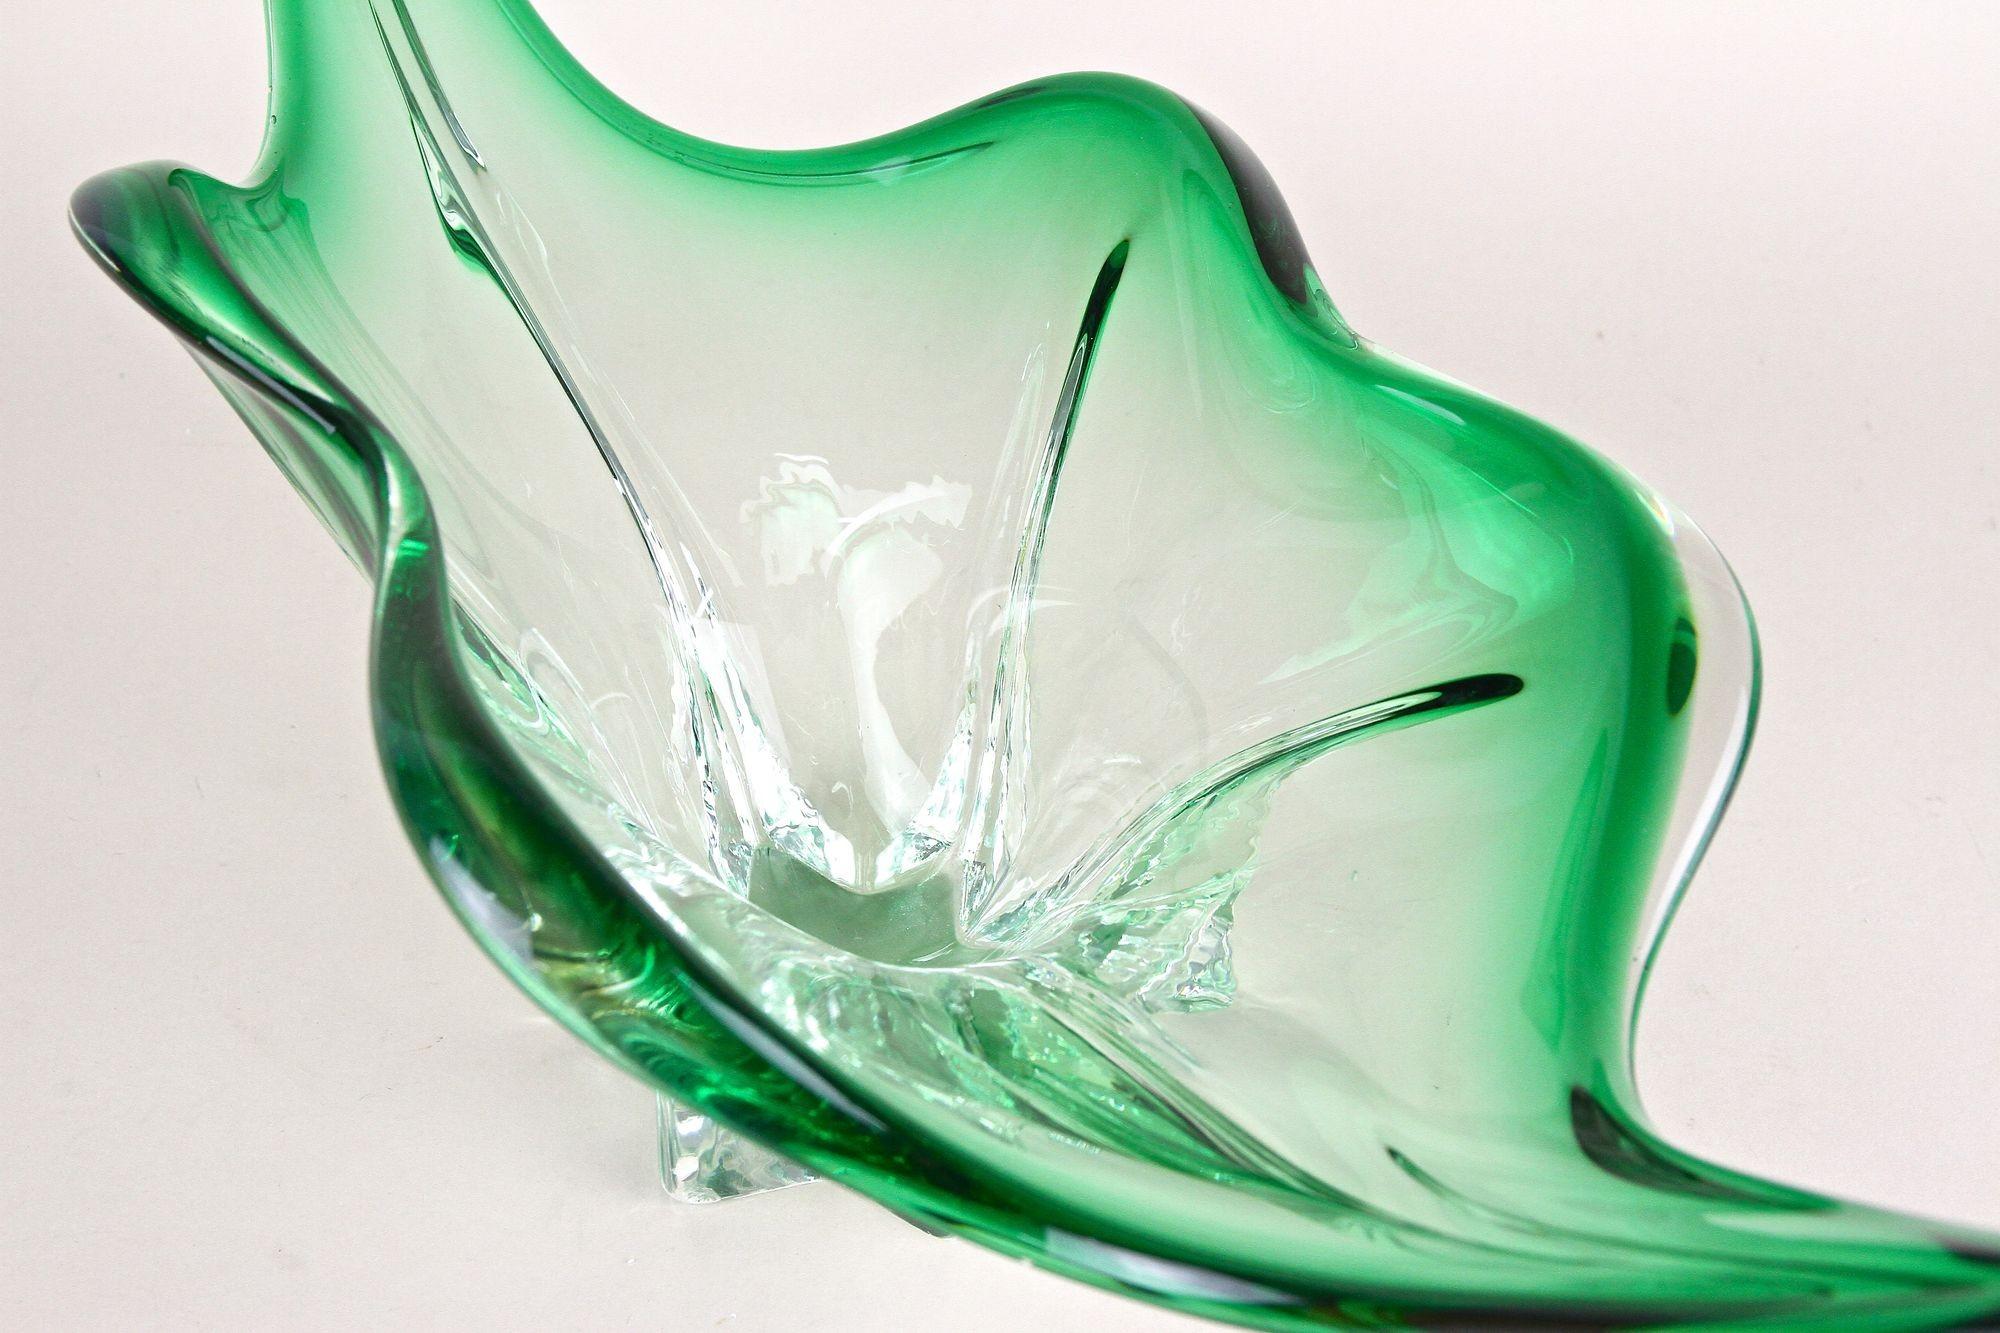 Mid Century Modern Murano Glass Bowl, Green/ Clear Tones - Italy ca. 1960 For Sale 1